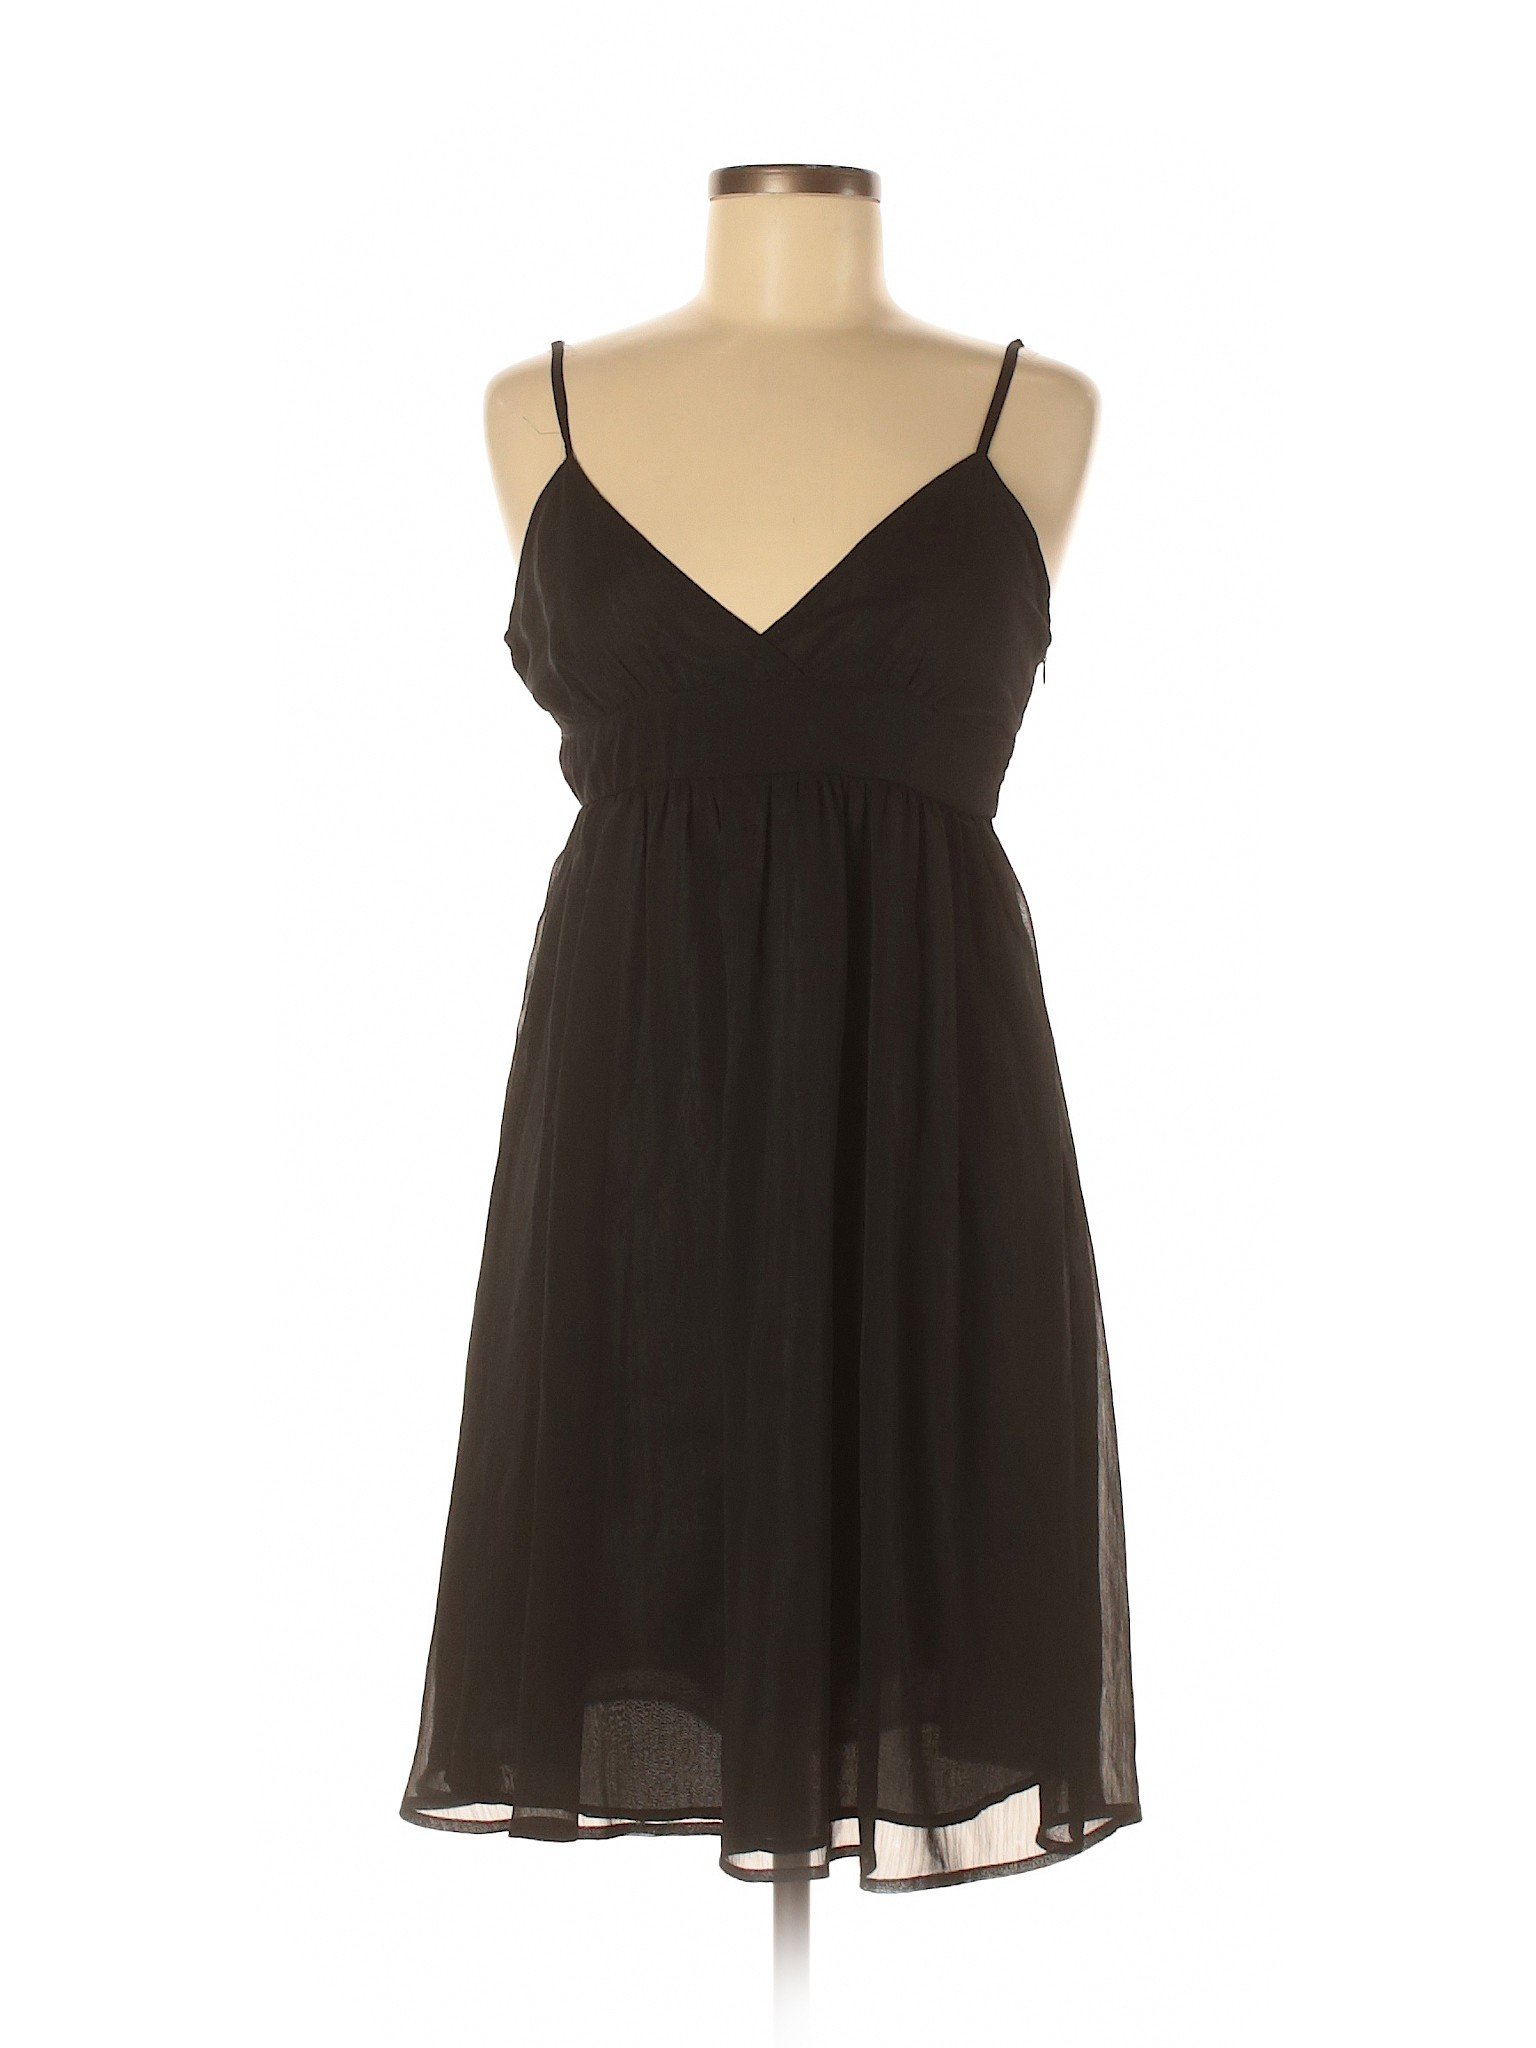 Forever 21 100% Polyester Solid Black Casual Dress Size S - 87% off ...